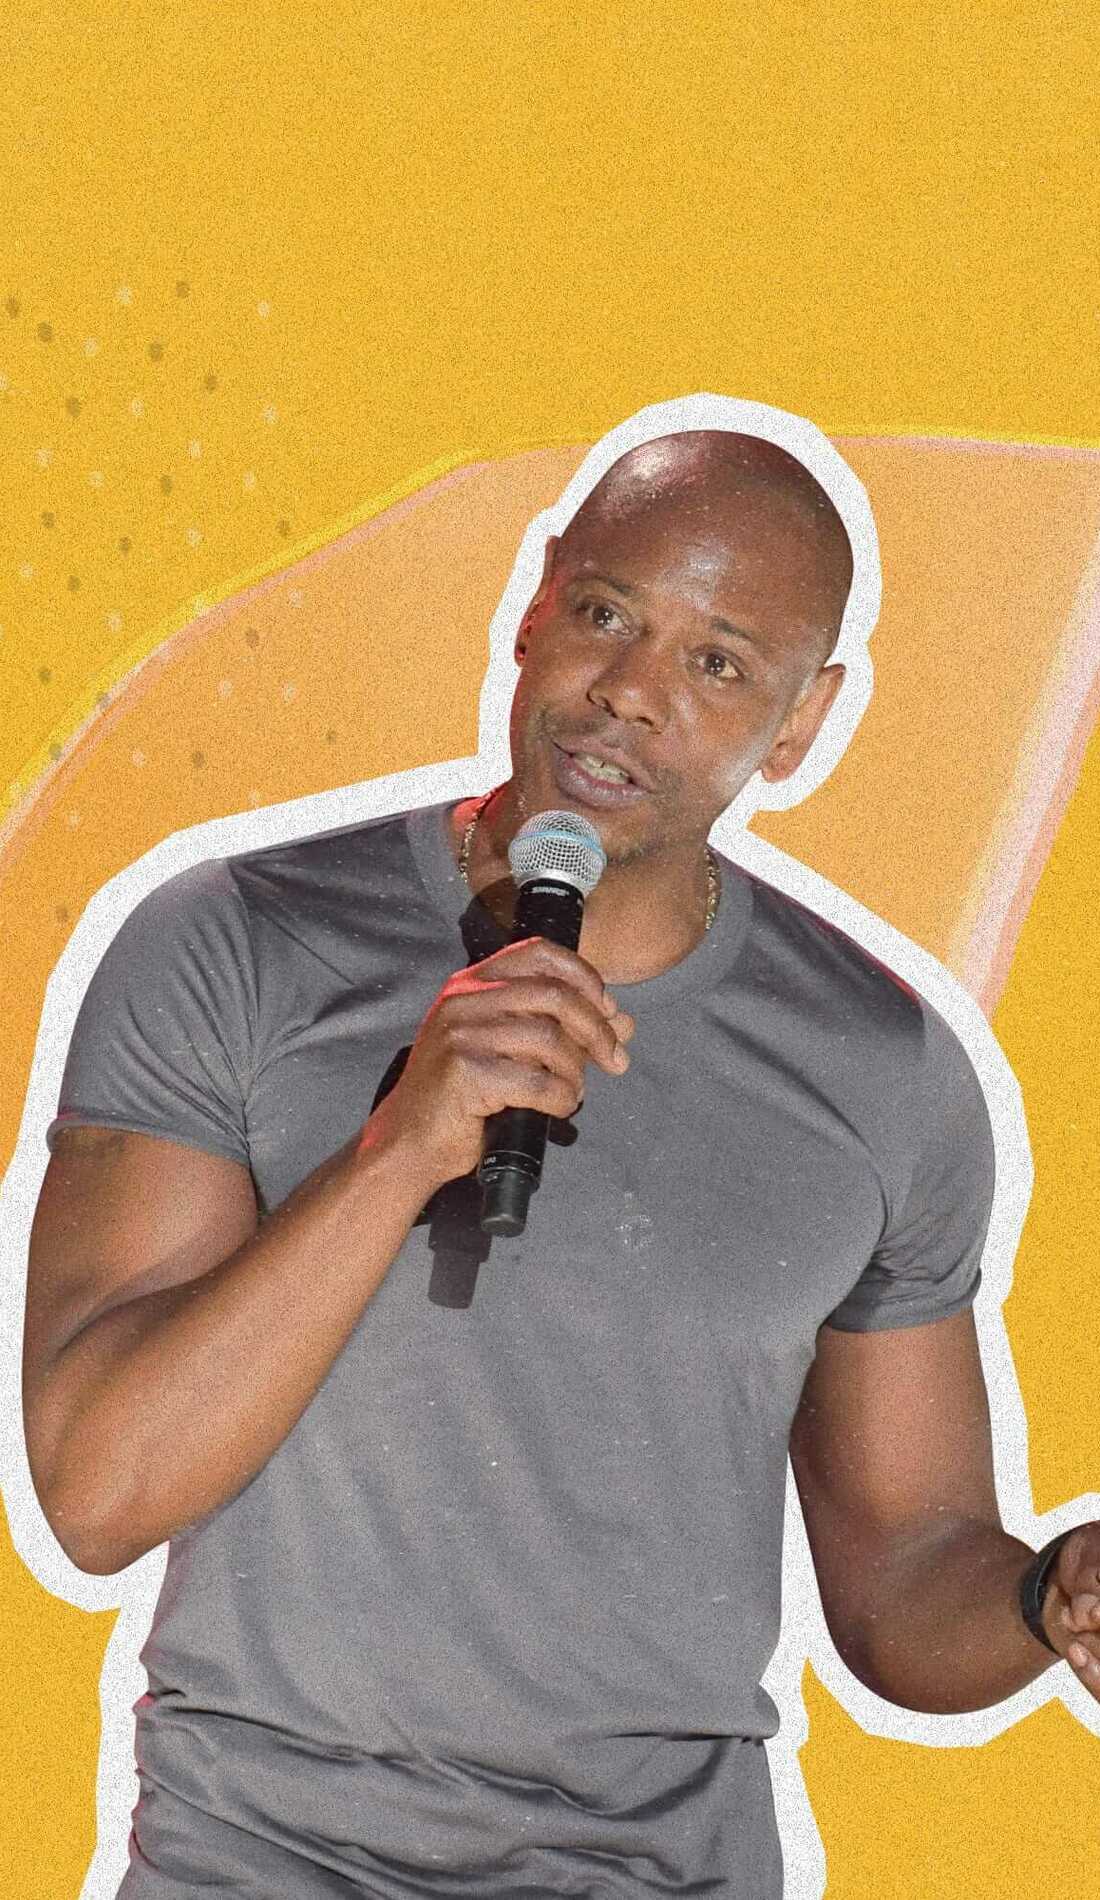 Dave Chappelle Tickets 2022 Dave Chappelle Tour SeatGeek